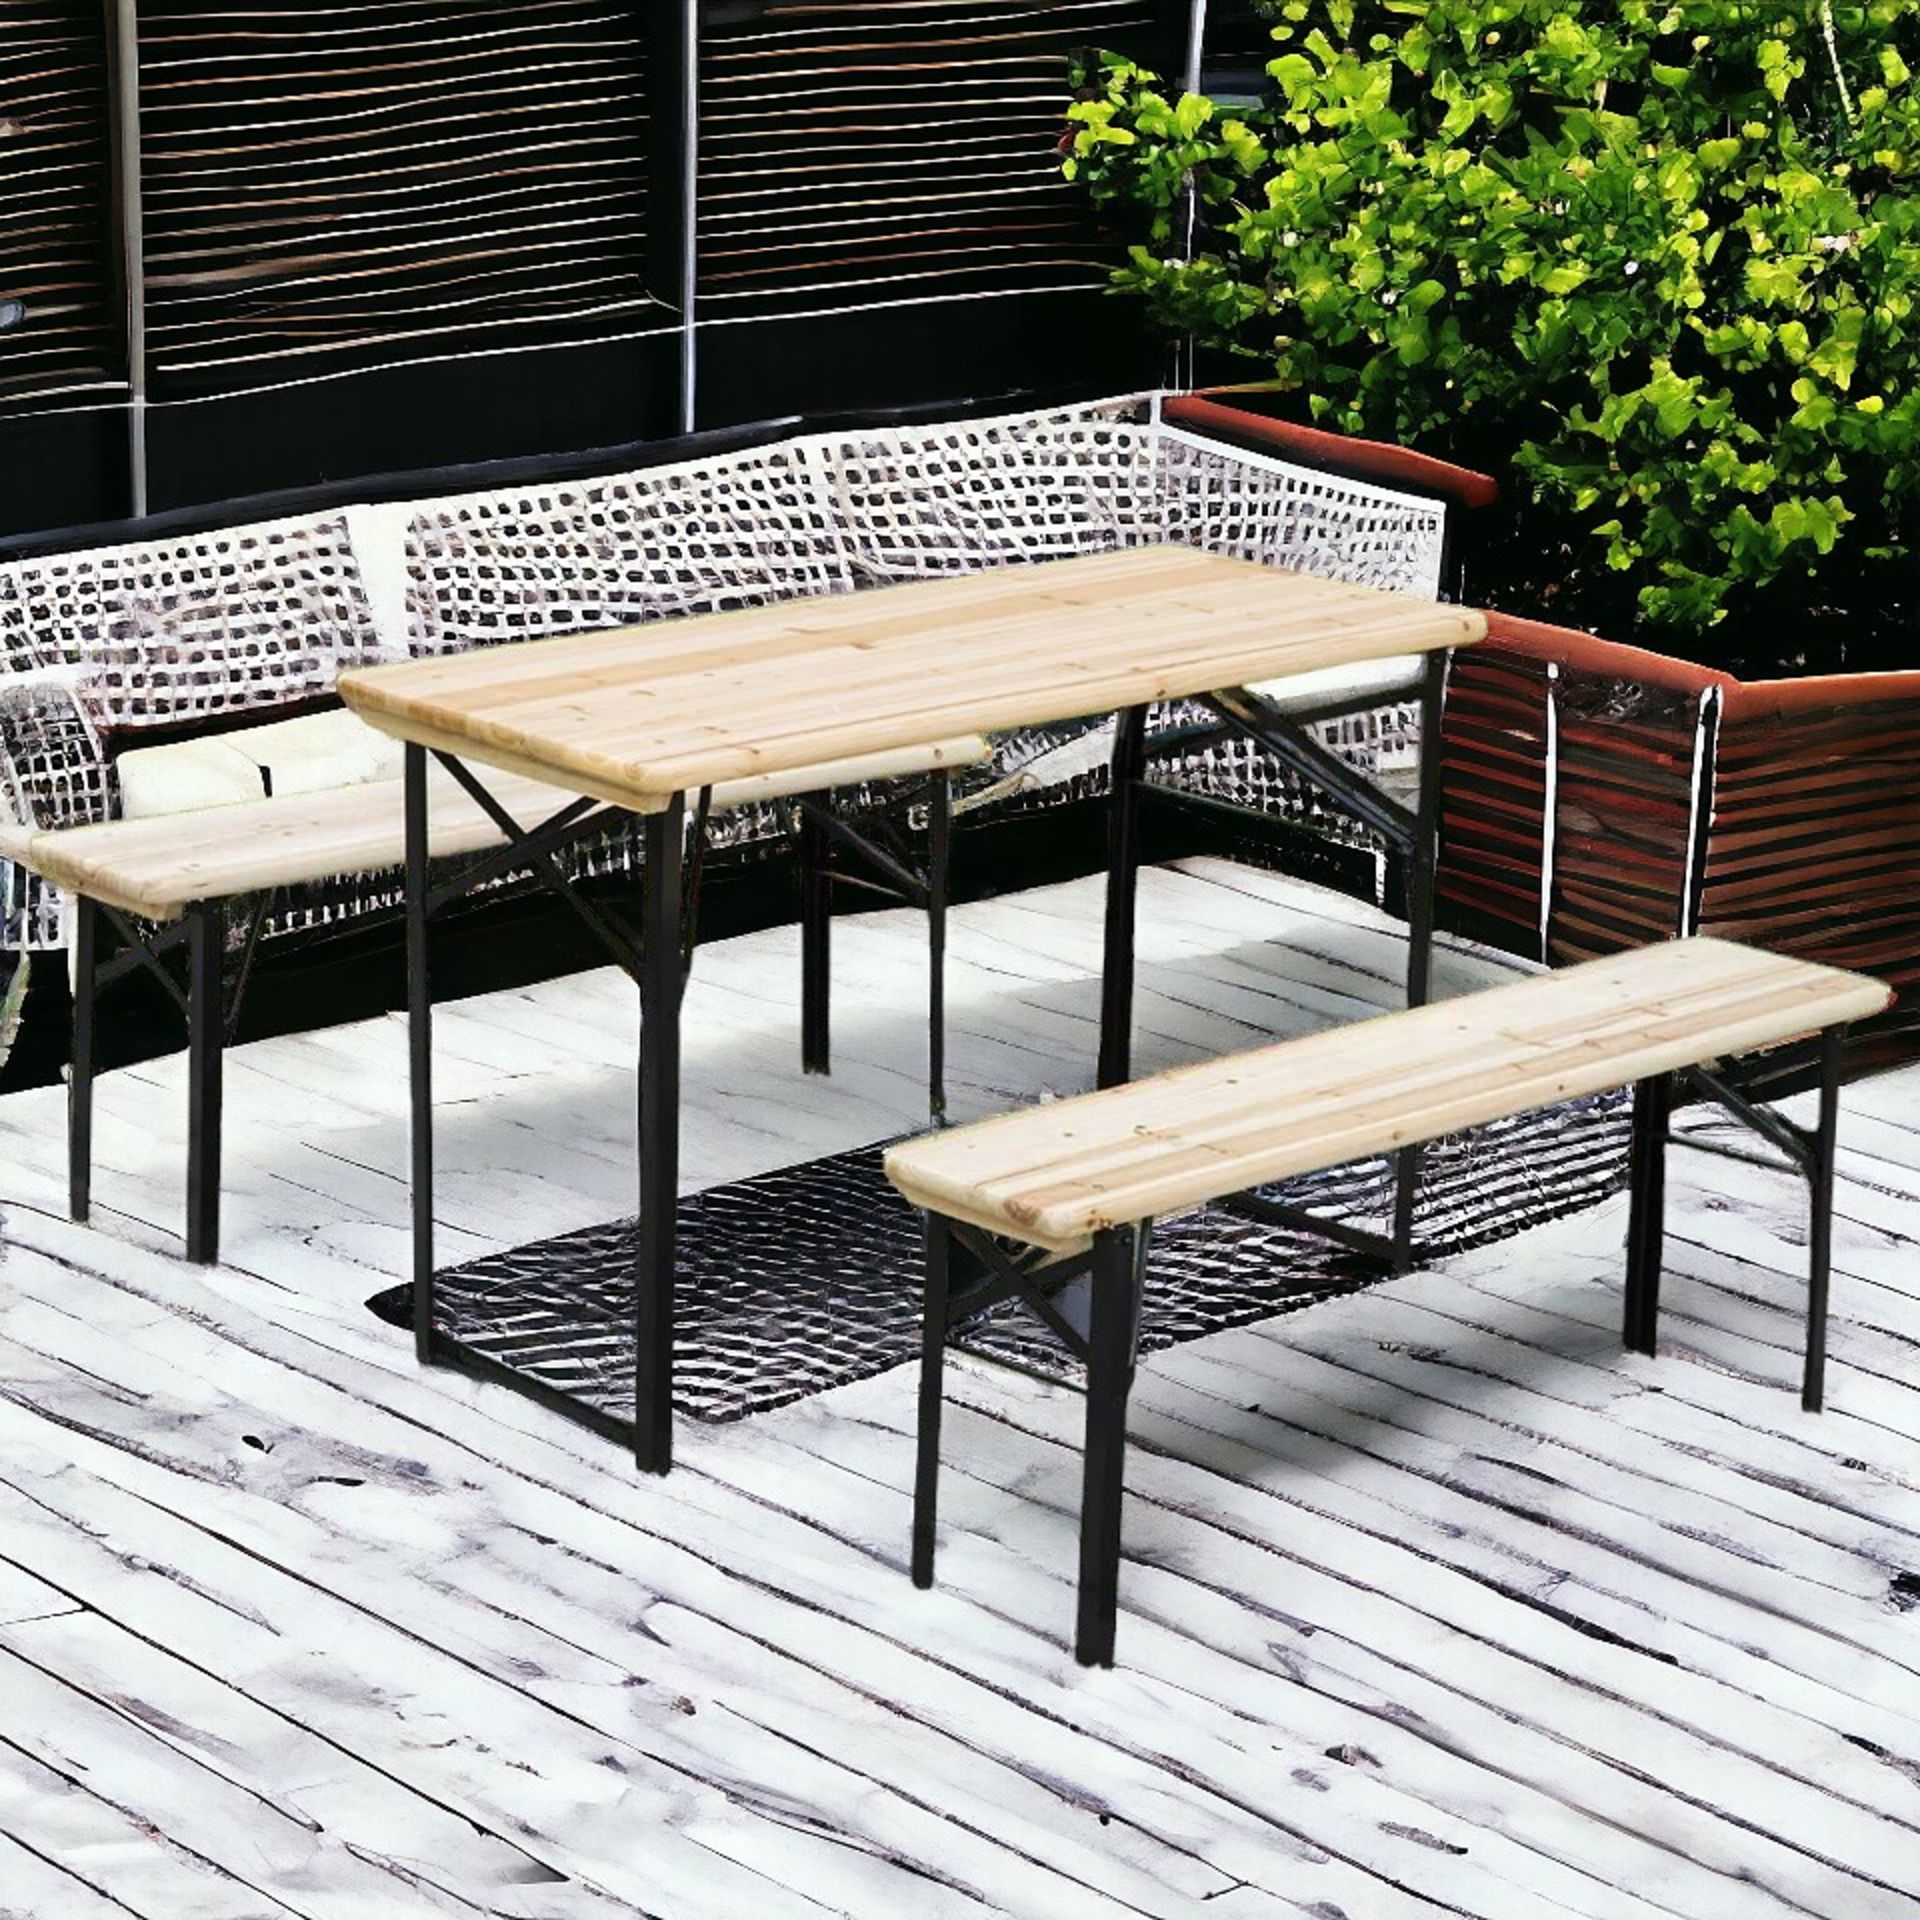 FREE DELIVERY- BRAND NEW OUTDOOR PICNIC TABLE PORTABLE FOLDING CAMPING PATIO BEER TABLE SET - Image 2 of 2